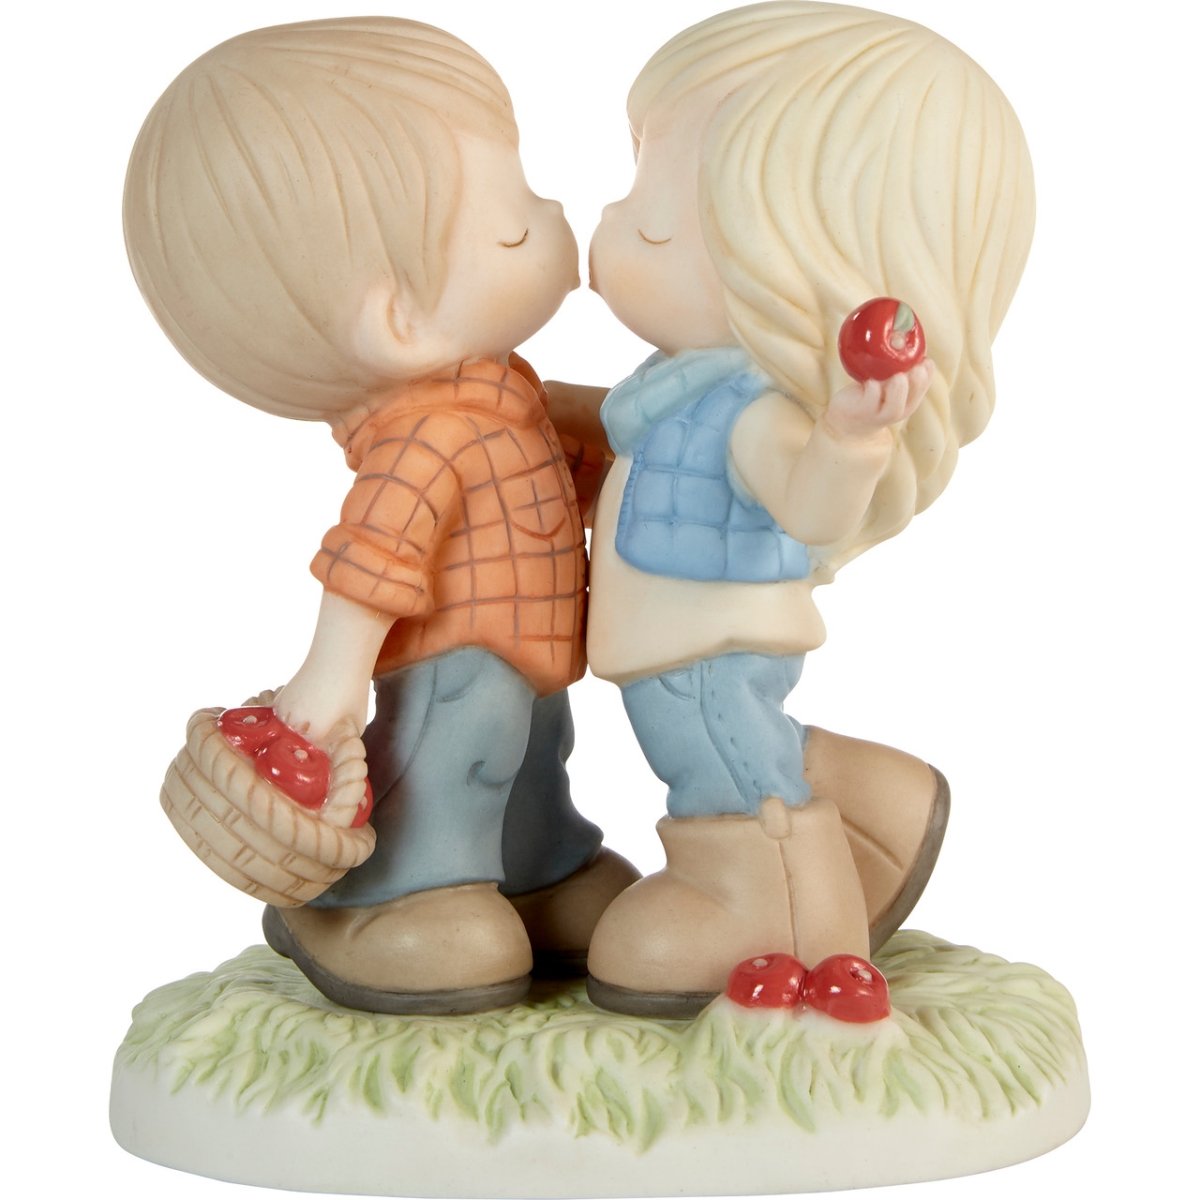 Picture of Be the Light Christian Bookstore 211021 Porcelain Couple Figurine with Bushel of Apples, White